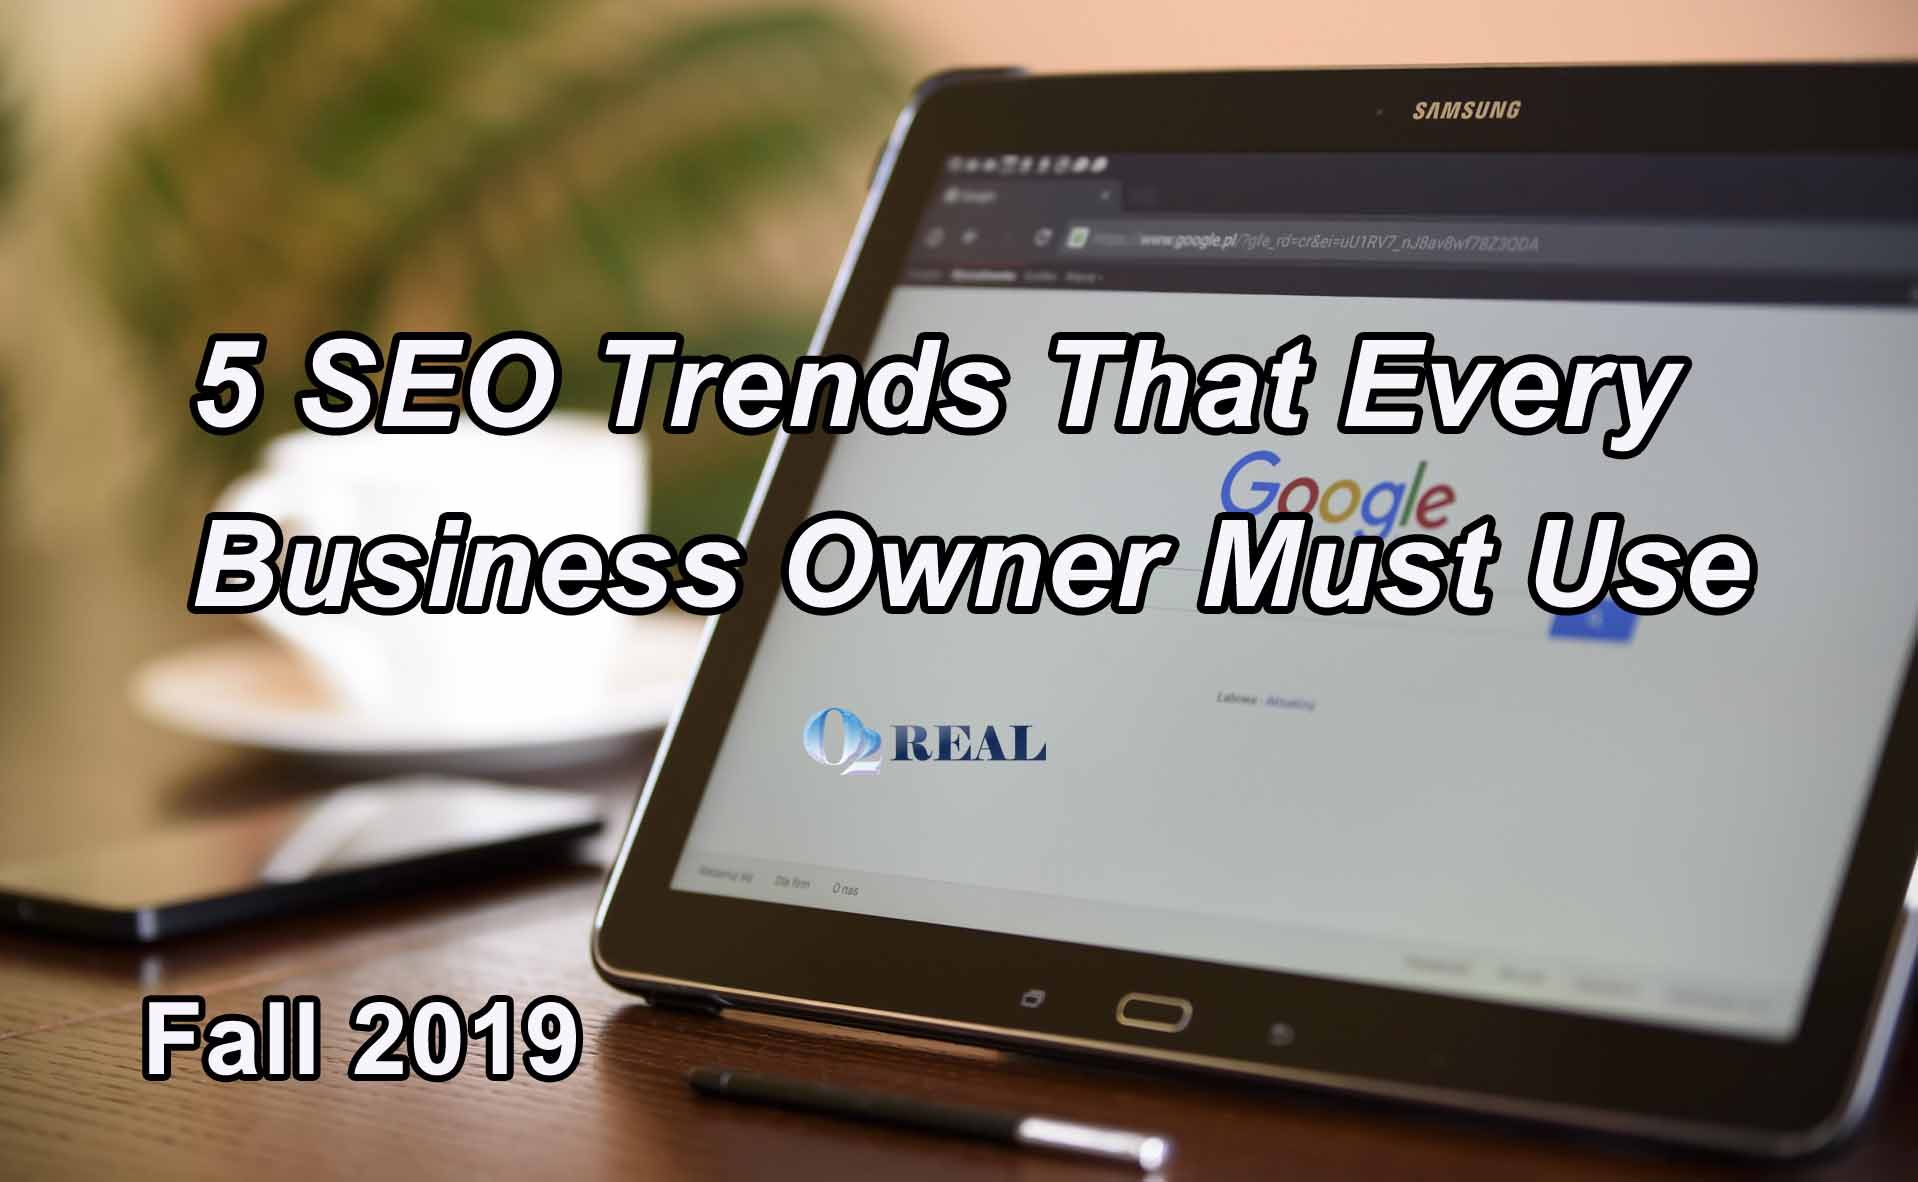 5 SEO Trends Every Business Owner Must Use 